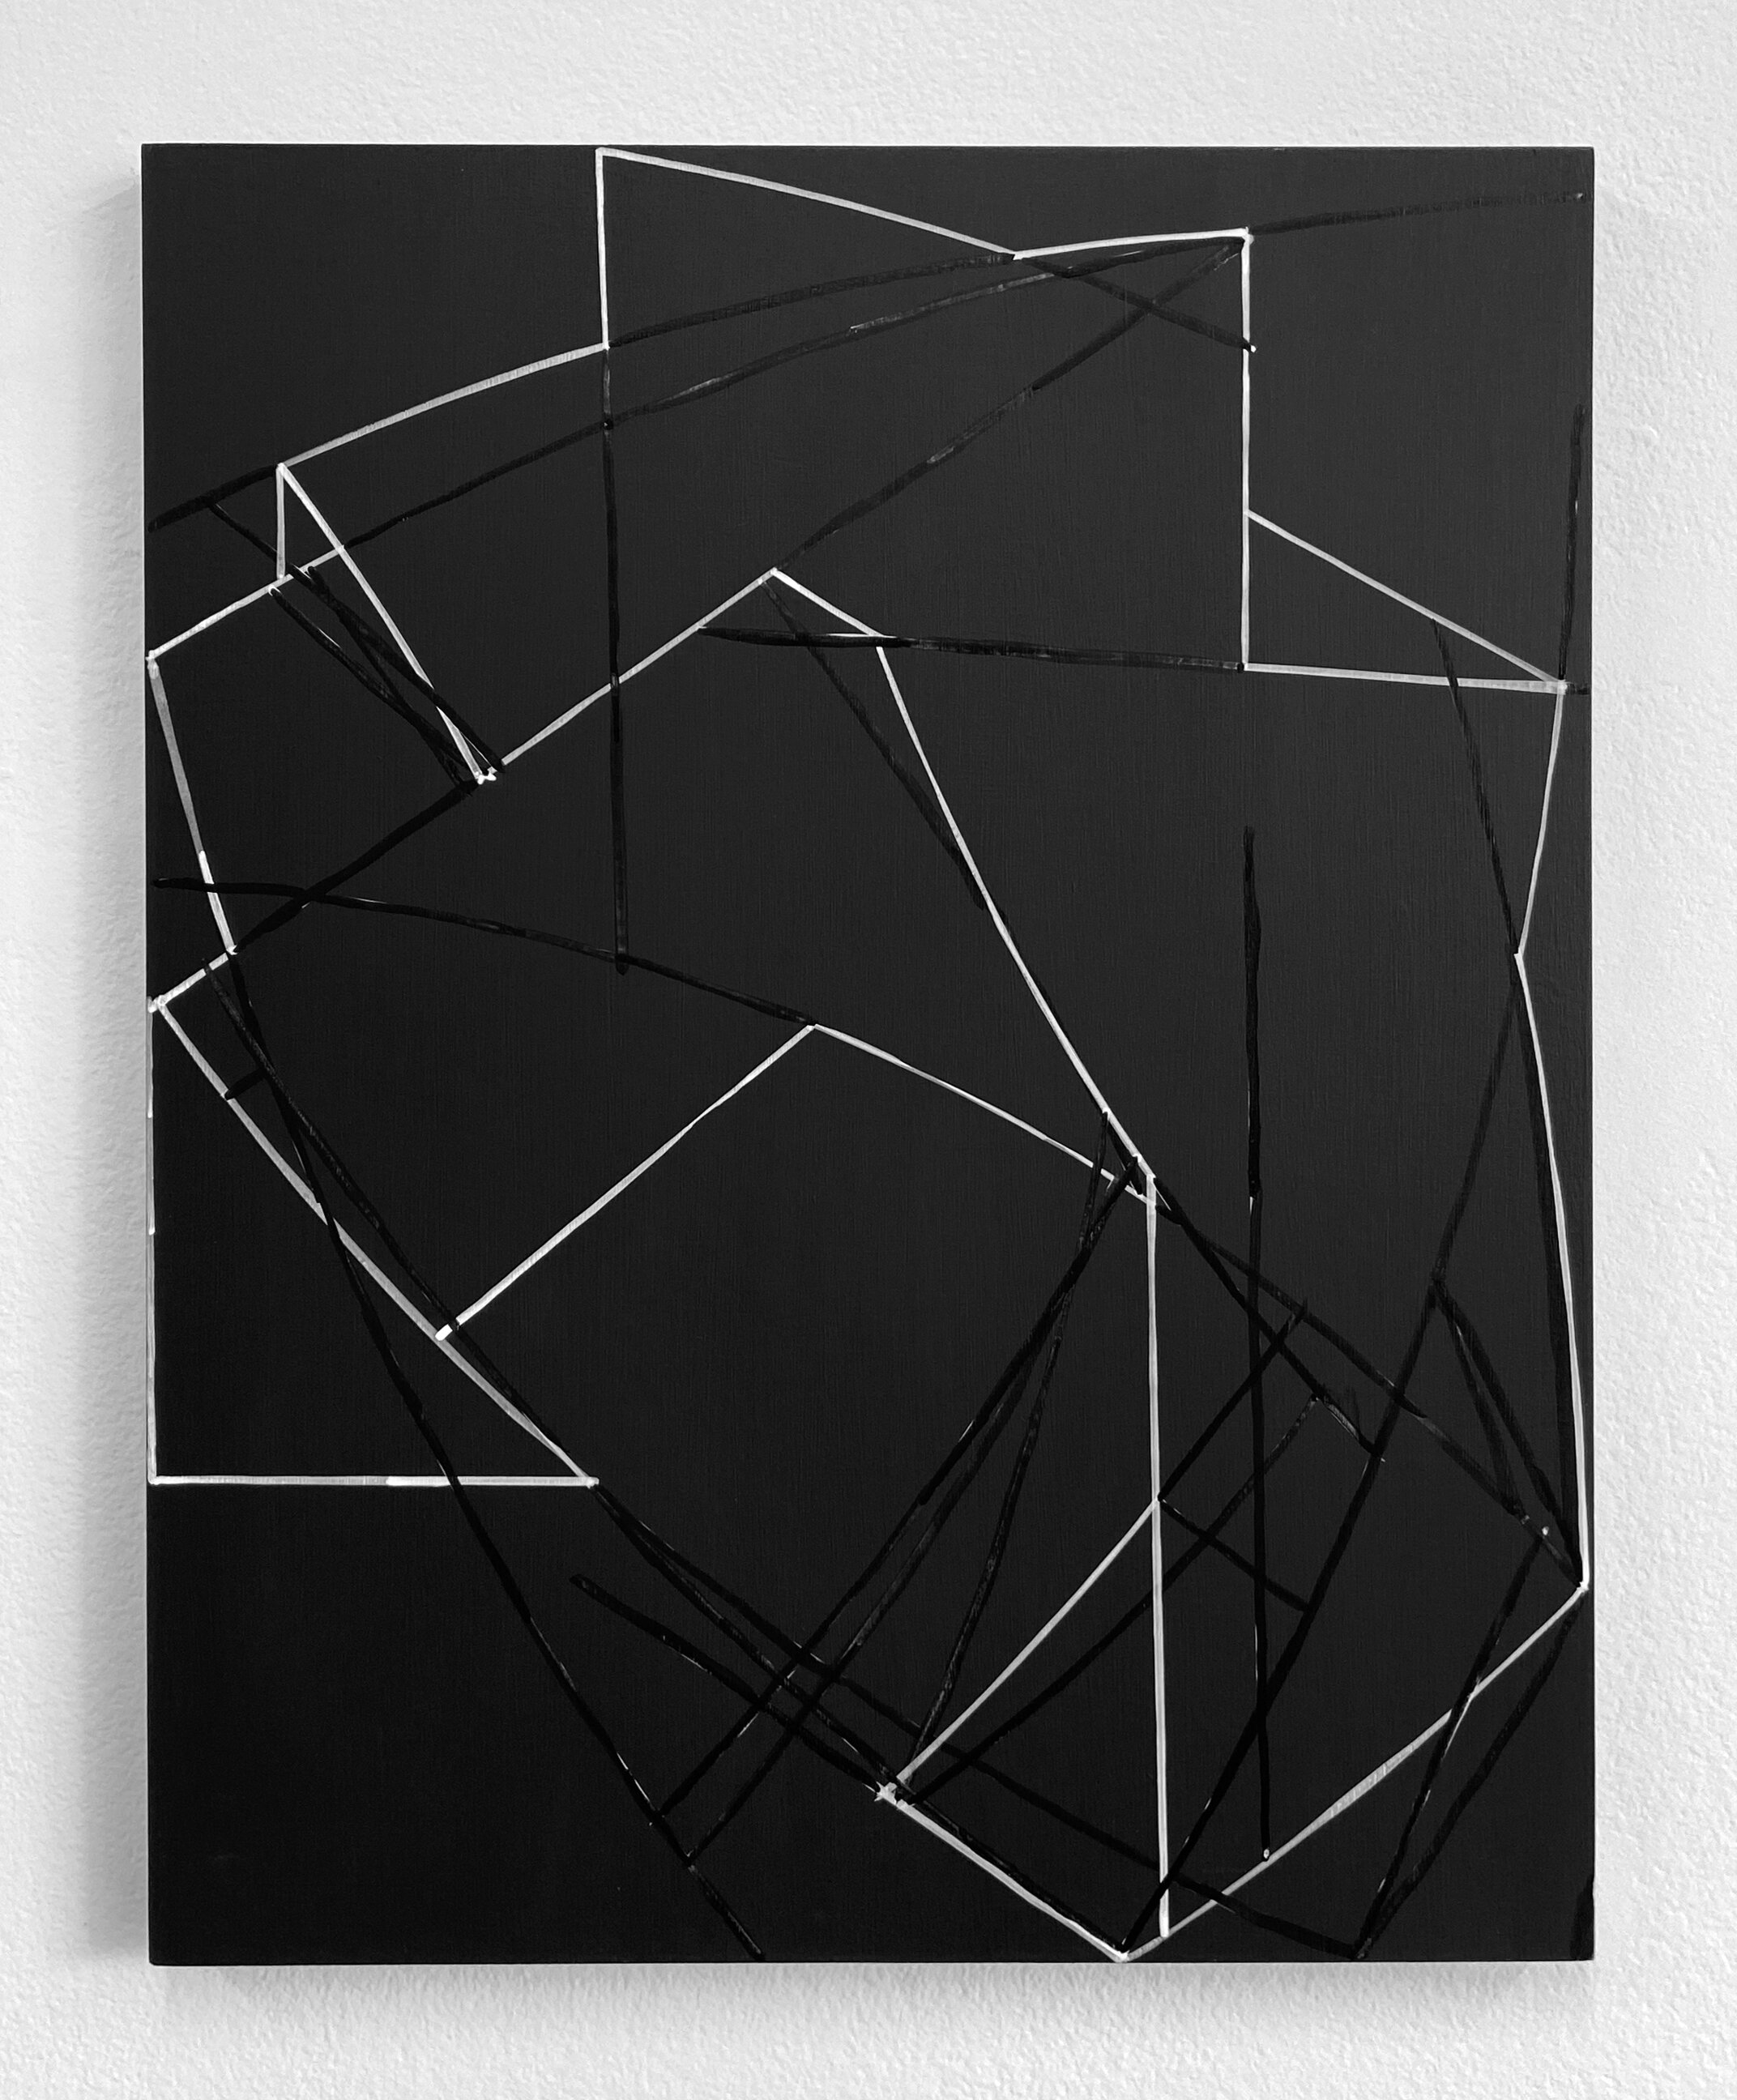   Untitled Drawing 77 , 2020, acrylic ink on gessoed panel, 20 x 16 in 